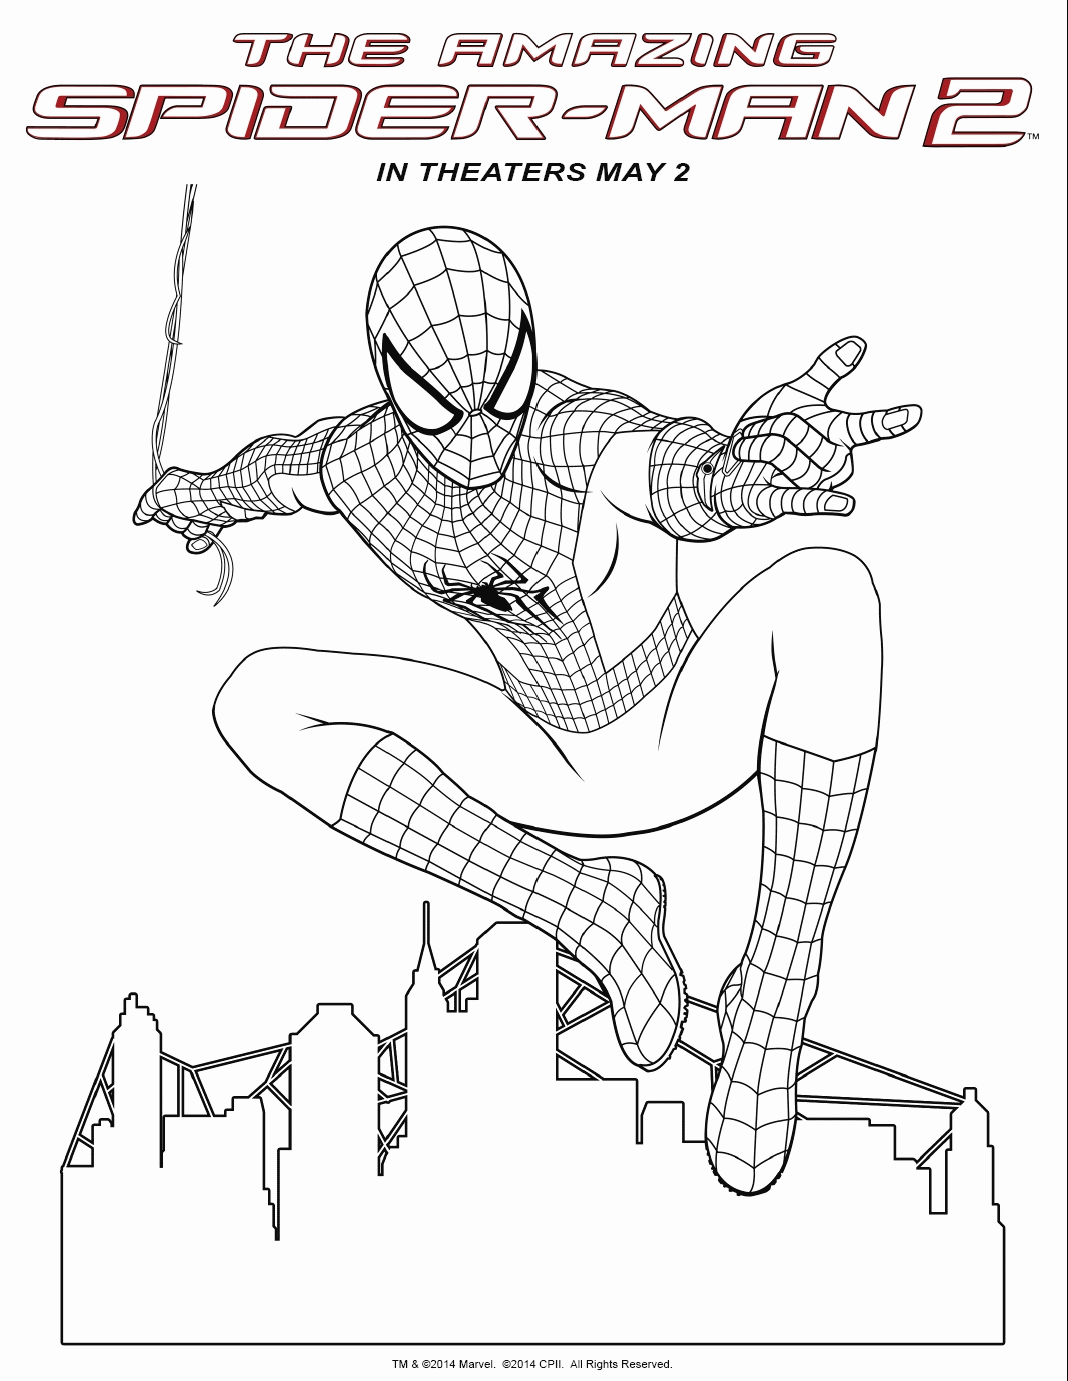 Amazing Spider-Man coloring pages ✓ by pagequest